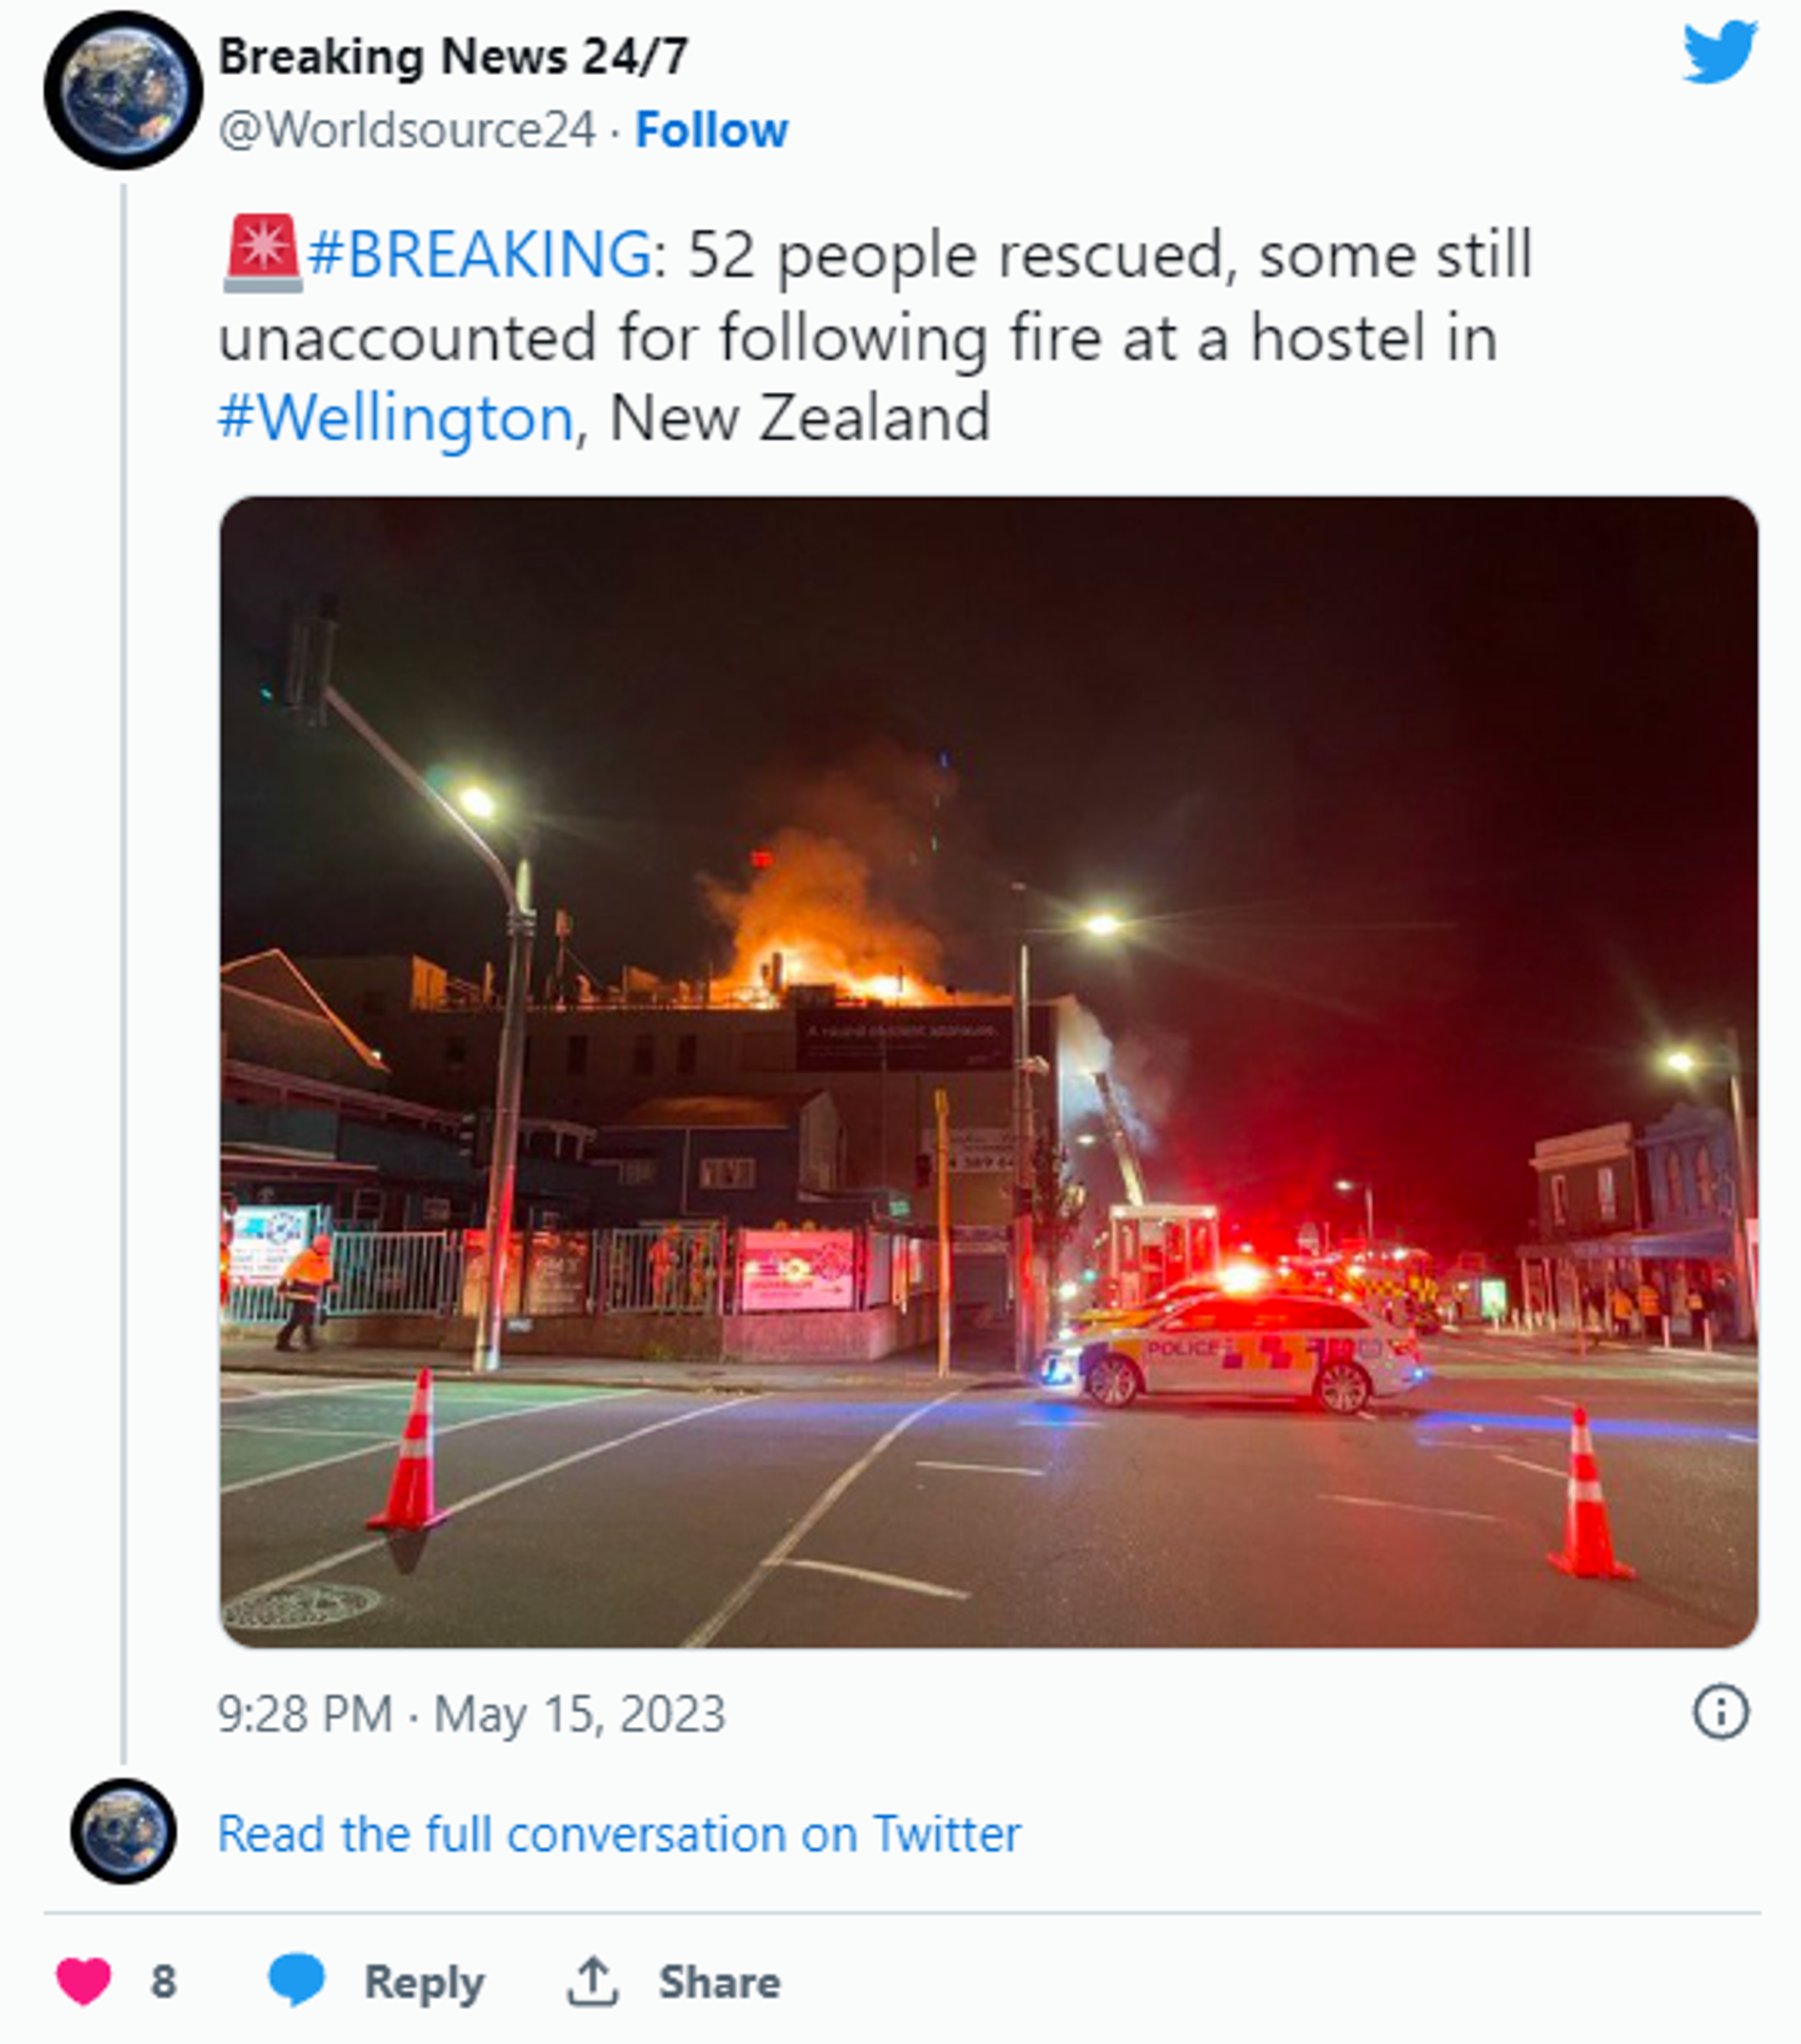 A post with a photo with a fire on the roof of a hostel in Wellington. - Sputnik International, 1920, 15.05.2023